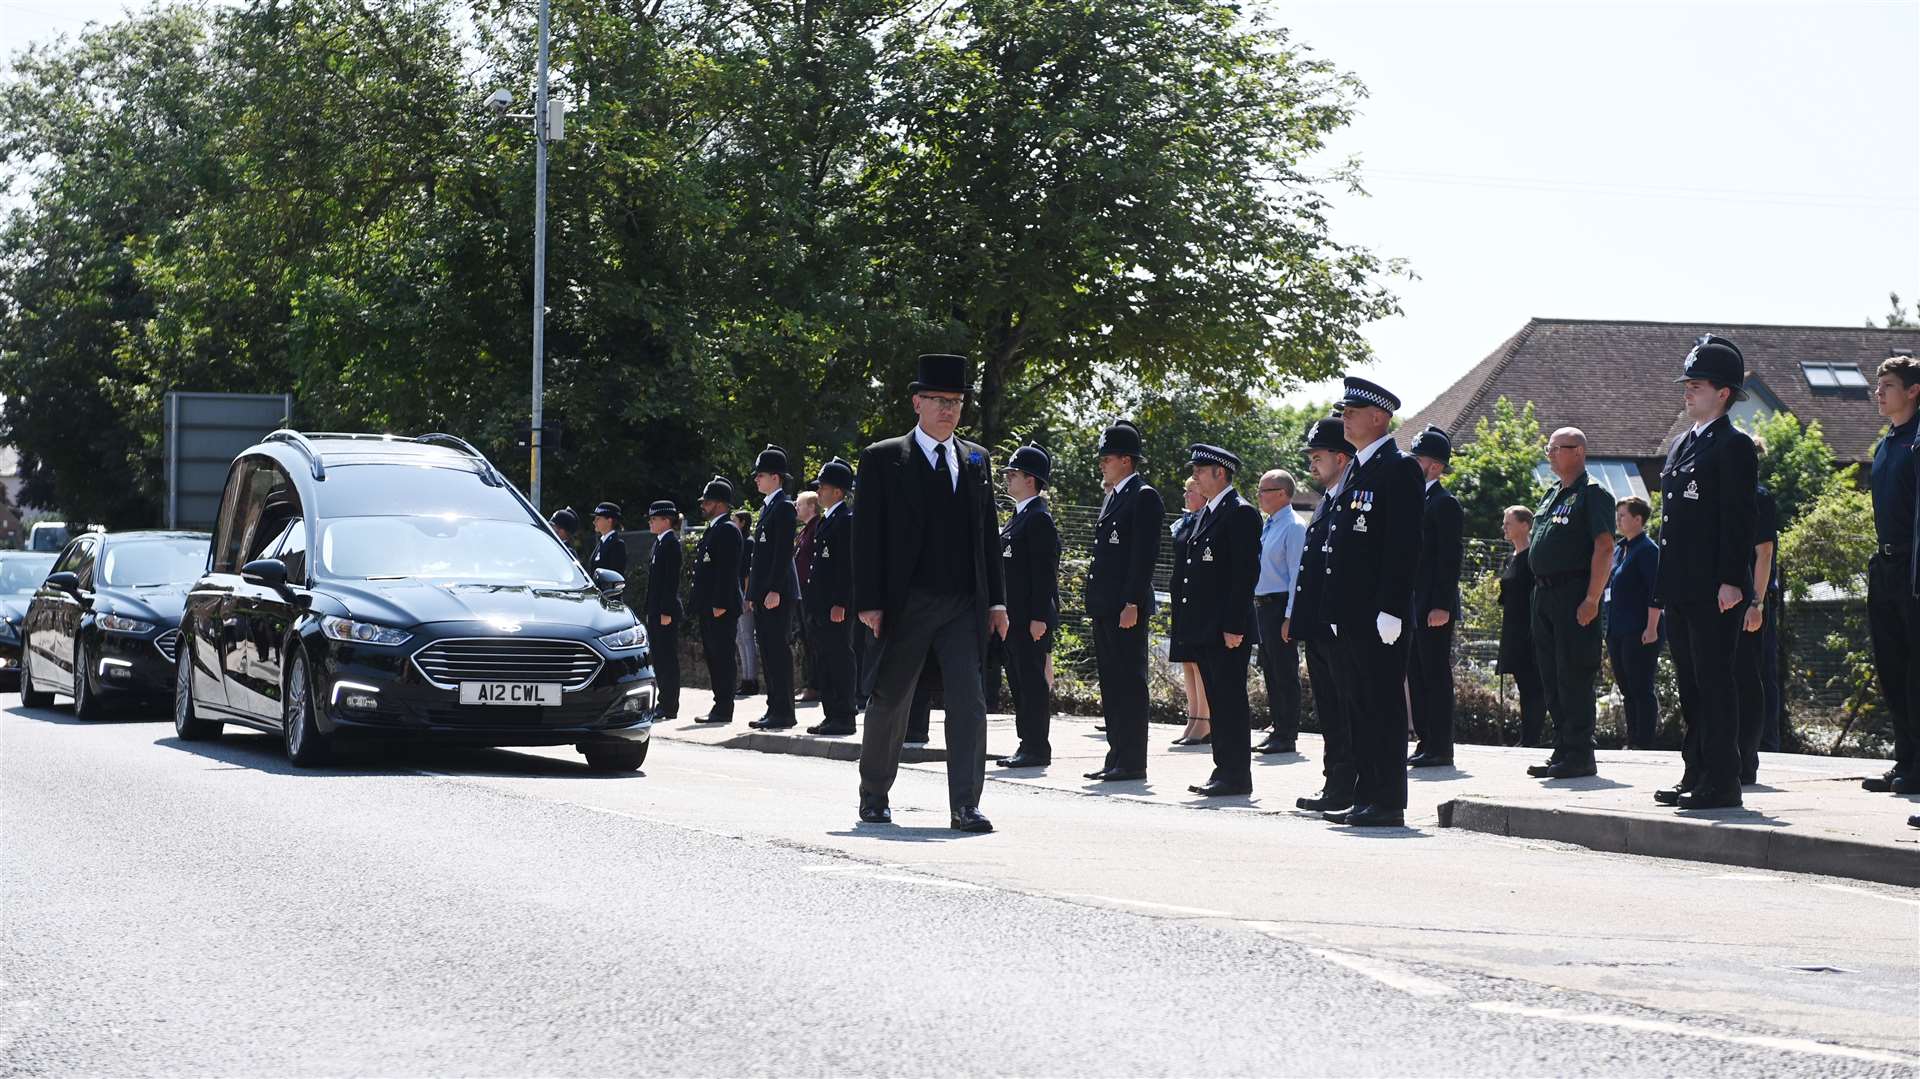 Julia James' funeral parade stops at the Canterbury Kent police station in Canterbury, so officers can pay their respect. Picture: Barry Goodwin